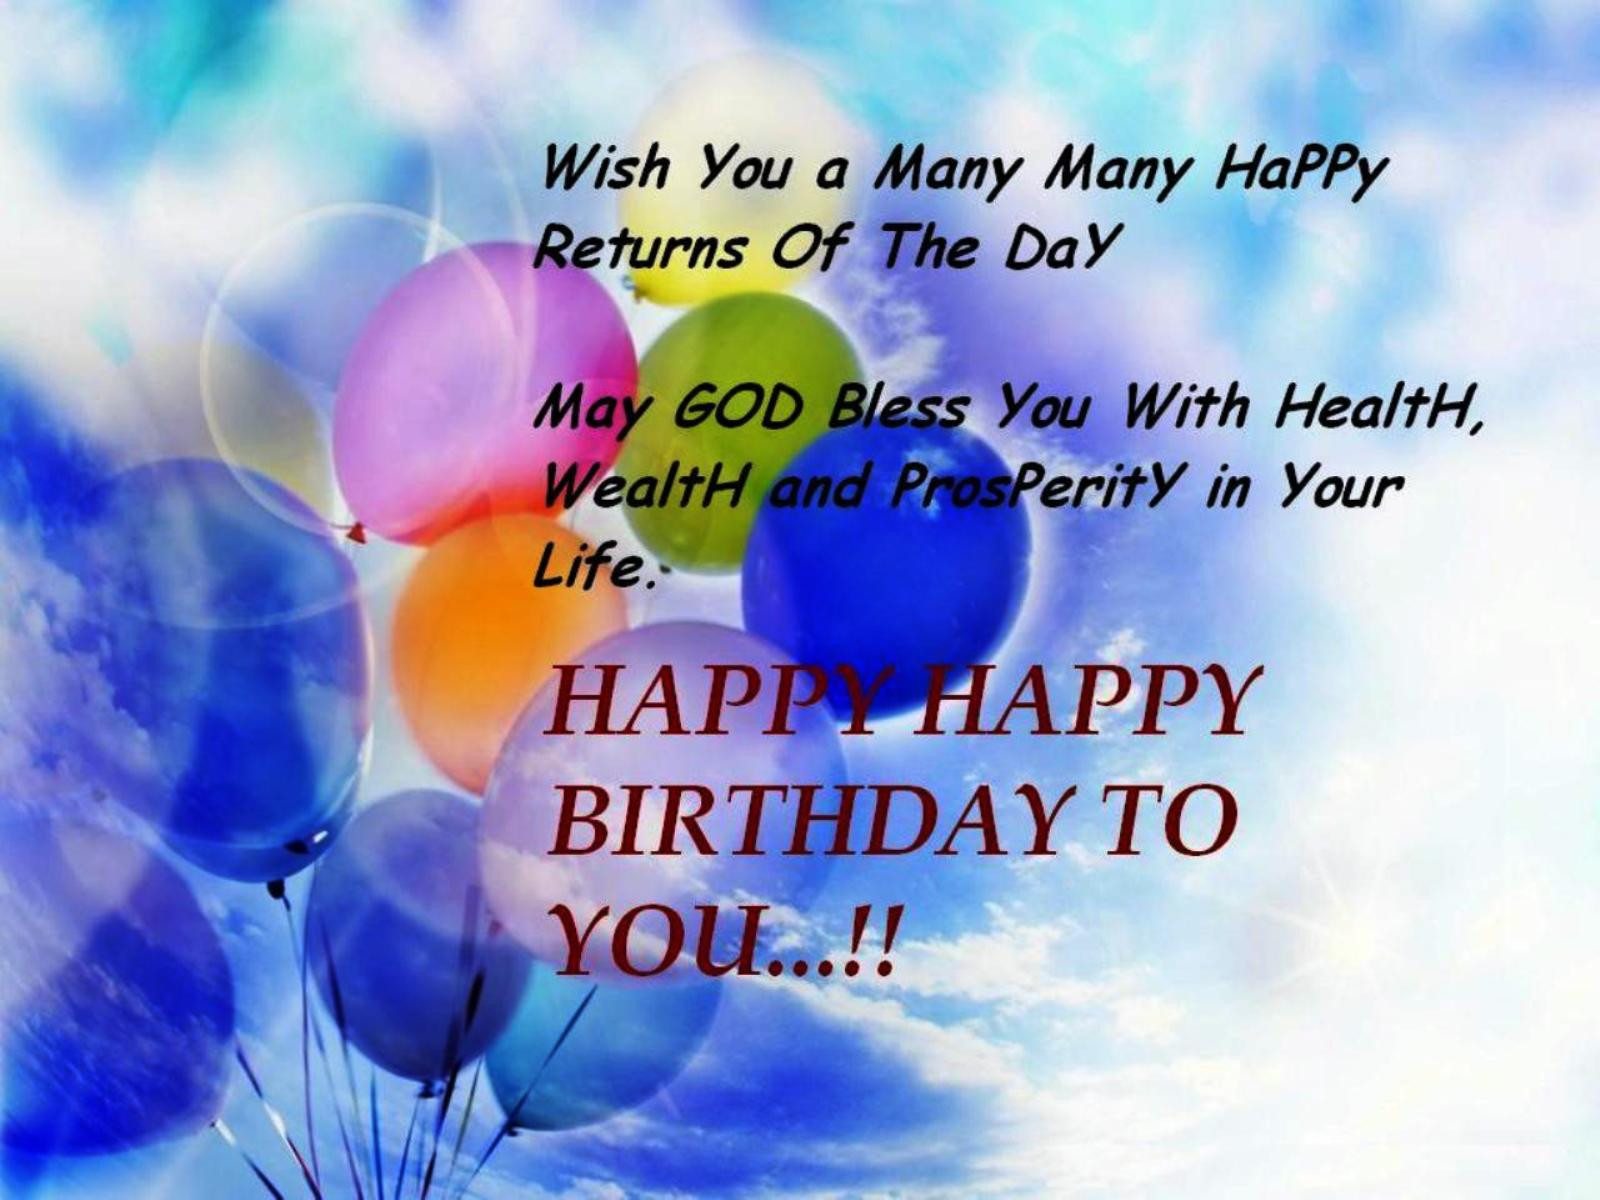 Happy Birthday Blessing Quotes
 Best Happy Birthday Wishes Quotes for 2018 Bday Messages